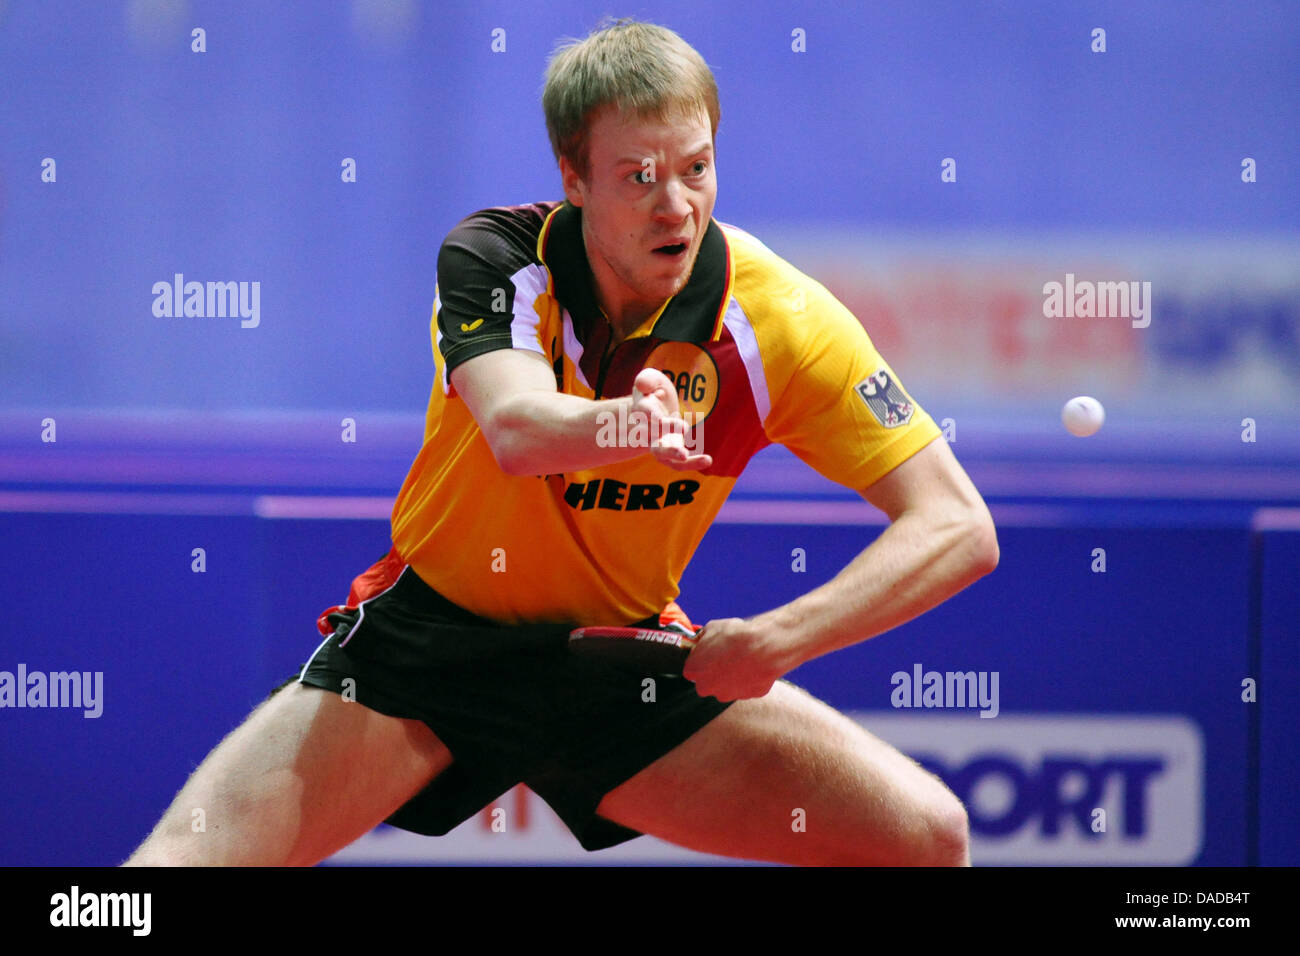 Patrick Baum plays a match against Aleksandar Karakasevic during the semi- final of the European table tennis championships in Danzig, Poland, 16  October 2011. Photo: Revierfoto Stock Photo - Alamy